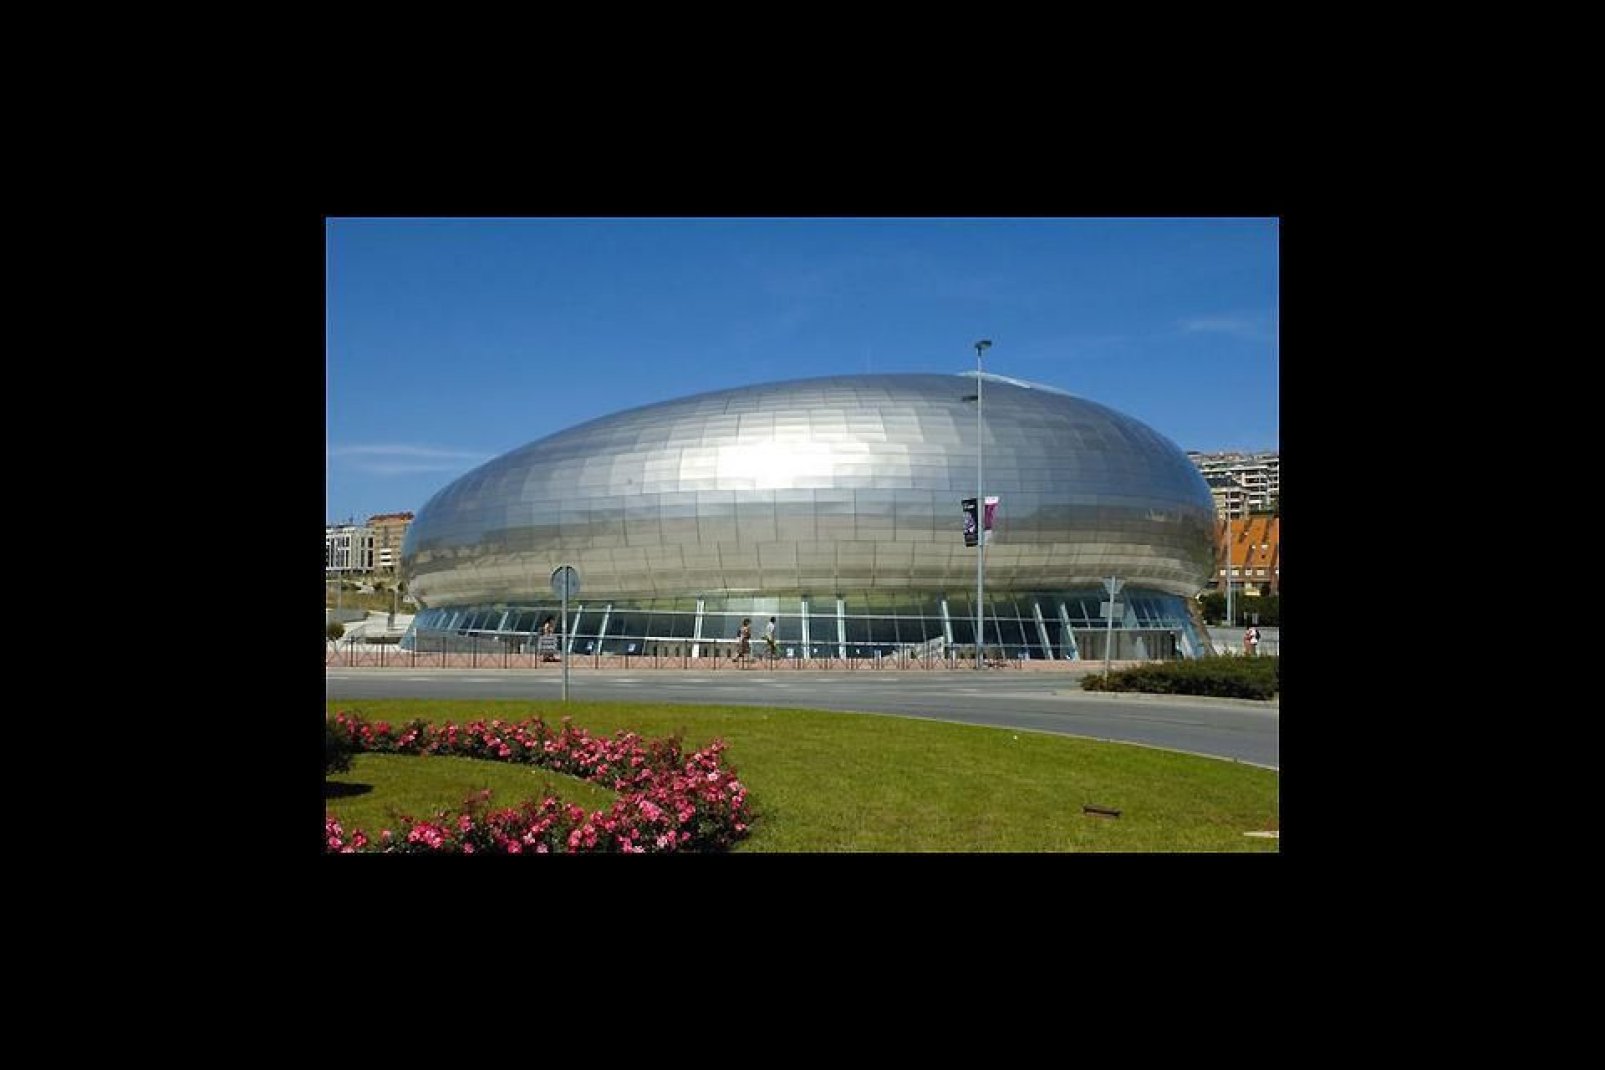 The Sports Palace in Santander.